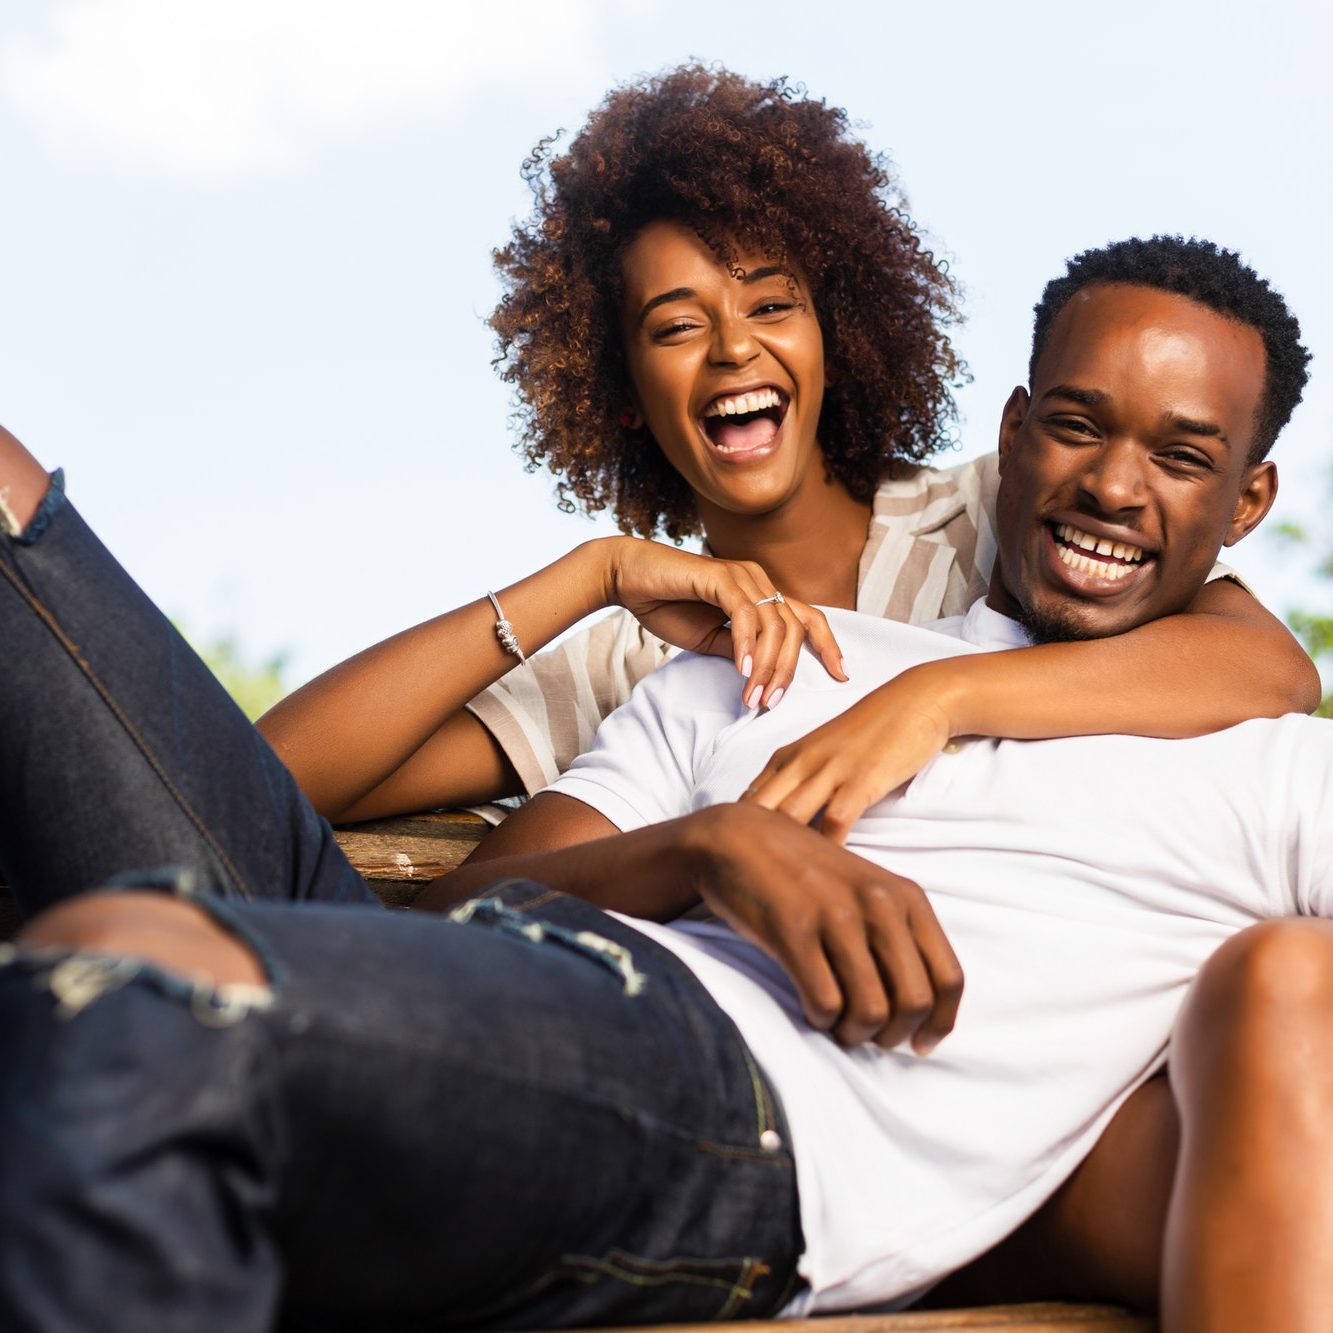 Outdoor protrait of black african american couple embracing each